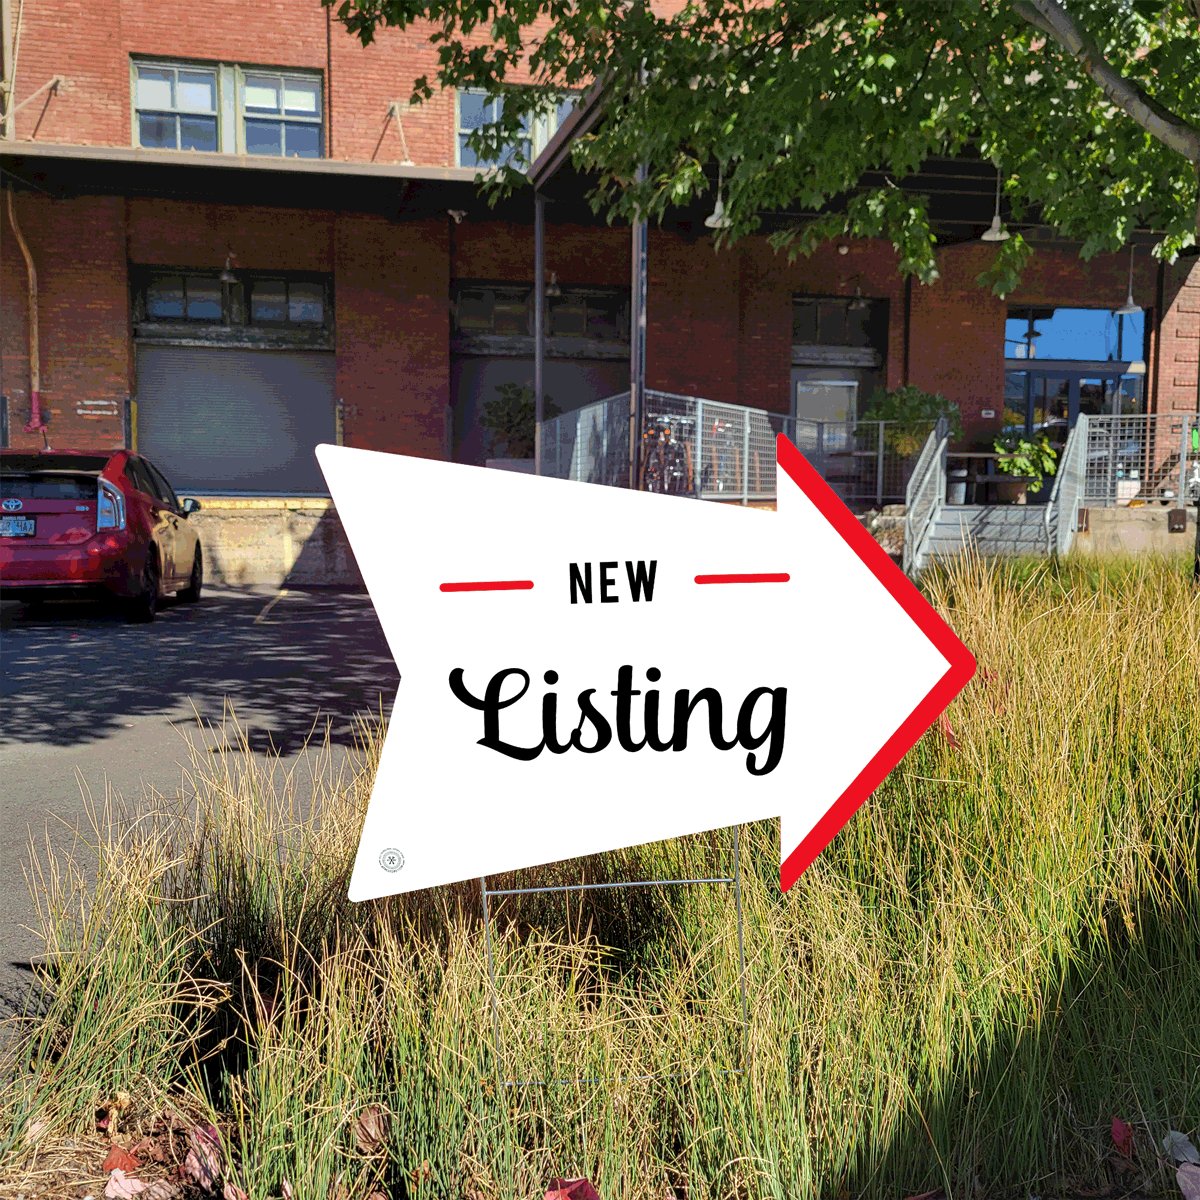 New Listing - Script & Bold Arrow - All Things Real Estate